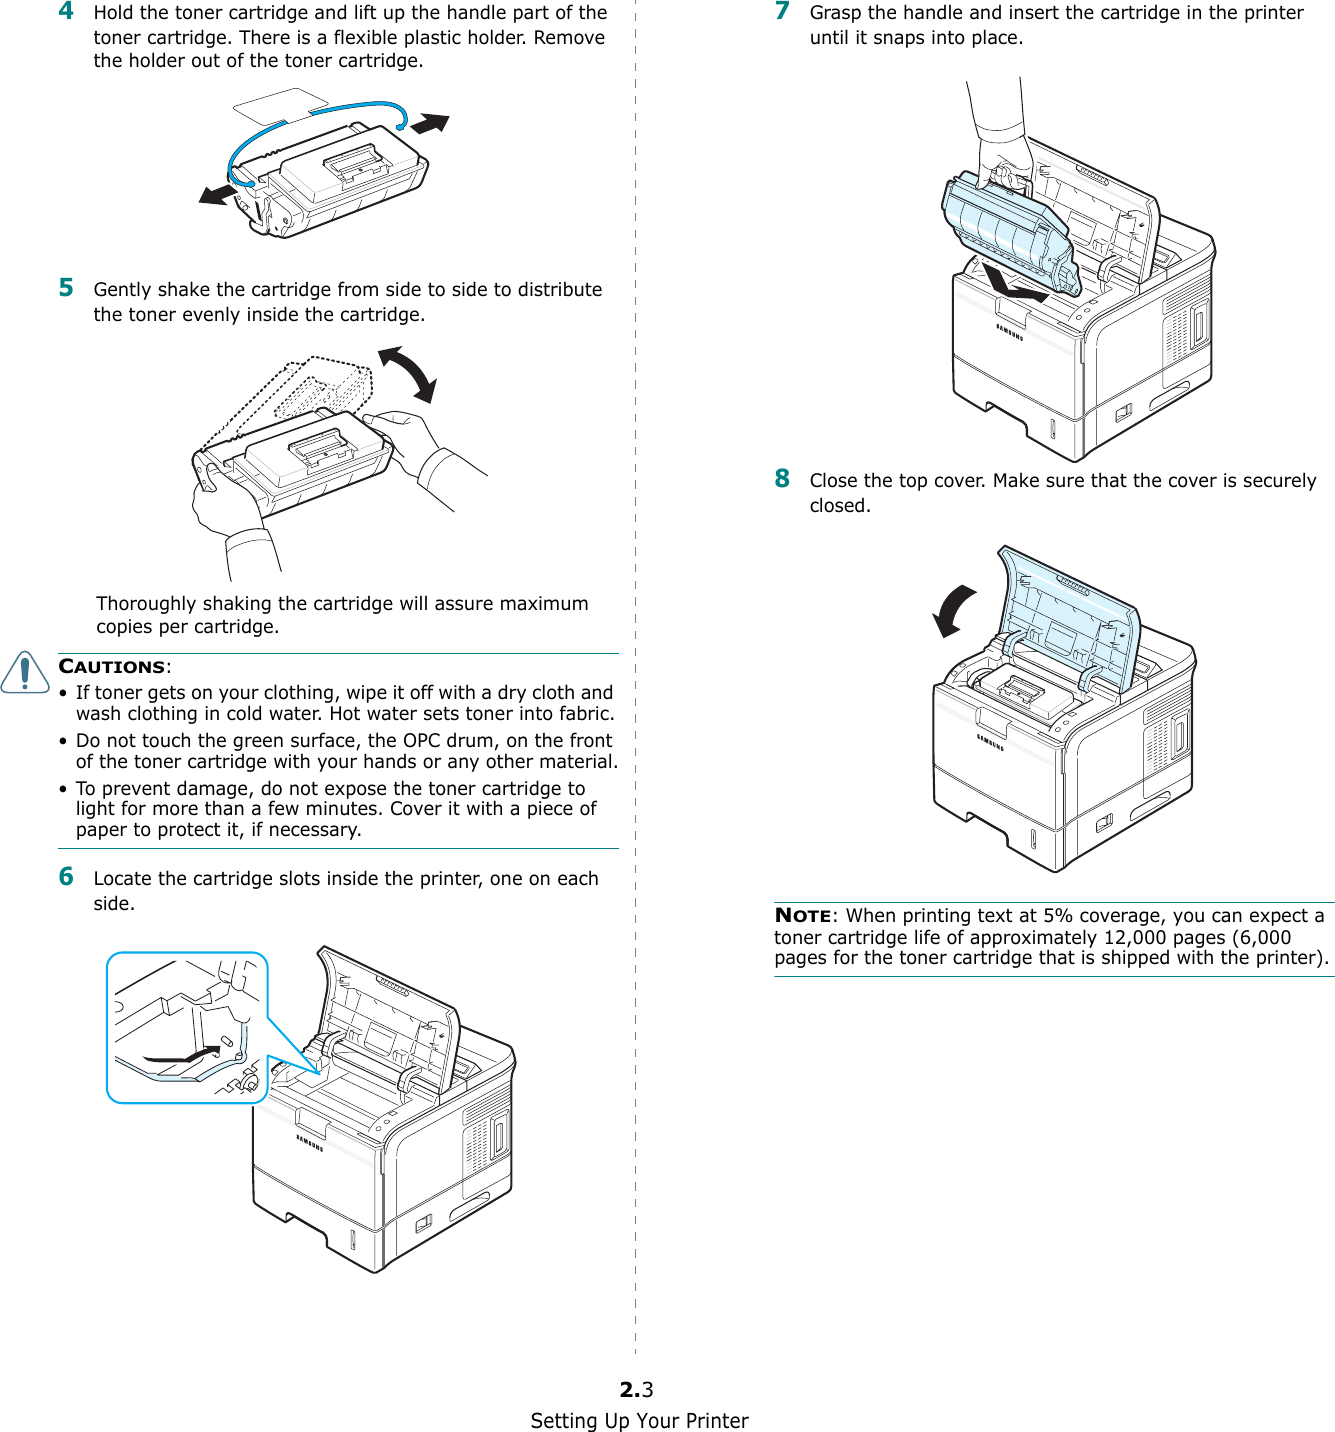 Setting Up Your Printer2.34Hold the toner cartridge and lift up the handle part of the toner cartridge. There is a flexible plastic holder. Remove the holder out of the toner cartridge.5Gently shake the cartridge from side to side to distribute the toner evenly inside the cartridge.Thoroughly shaking the cartridge will assure maximum copies per cartridge.CAUTIONS:• If toner gets on your clothing, wipe it off with a dry cloth and wash clothing in cold water. Hot water sets toner into fabric.• Do not touch the green surface, the OPC drum, on the front of the toner cartridge with your hands or any other material.• To prevent damage, do not expose the toner cartridge to light for more than a few minutes. Cover it with a piece of paper to protect it, if necessary.6Locate the cartridge slots inside the printer, one on each side.7Grasp the handle and insert the cartridge in the printer until it snaps into place.8Close the top cover. Make sure that the cover is securely closed.NOTE: When printing text at 5% coverage, you can expect a toner cartridge life of approximately 12,000 pages (6,000 pages for the toner cartridge that is shipped with the printer).